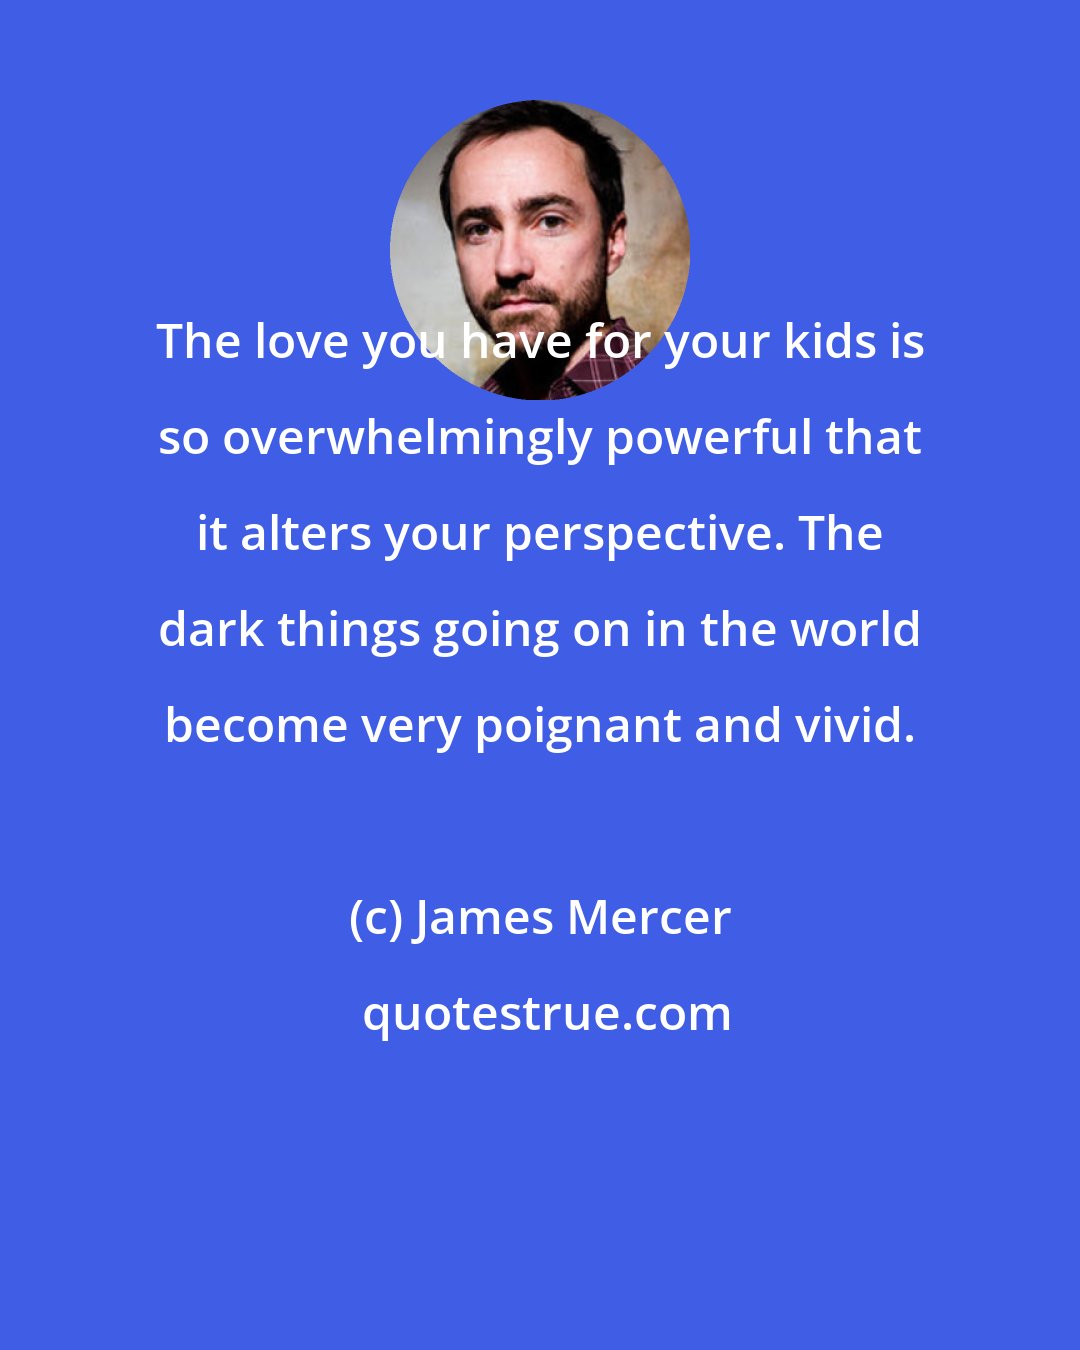 James Mercer: The love you have for your kids is so overwhelmingly powerful that it alters your perspective. The dark things going on in the world become very poignant and vivid.